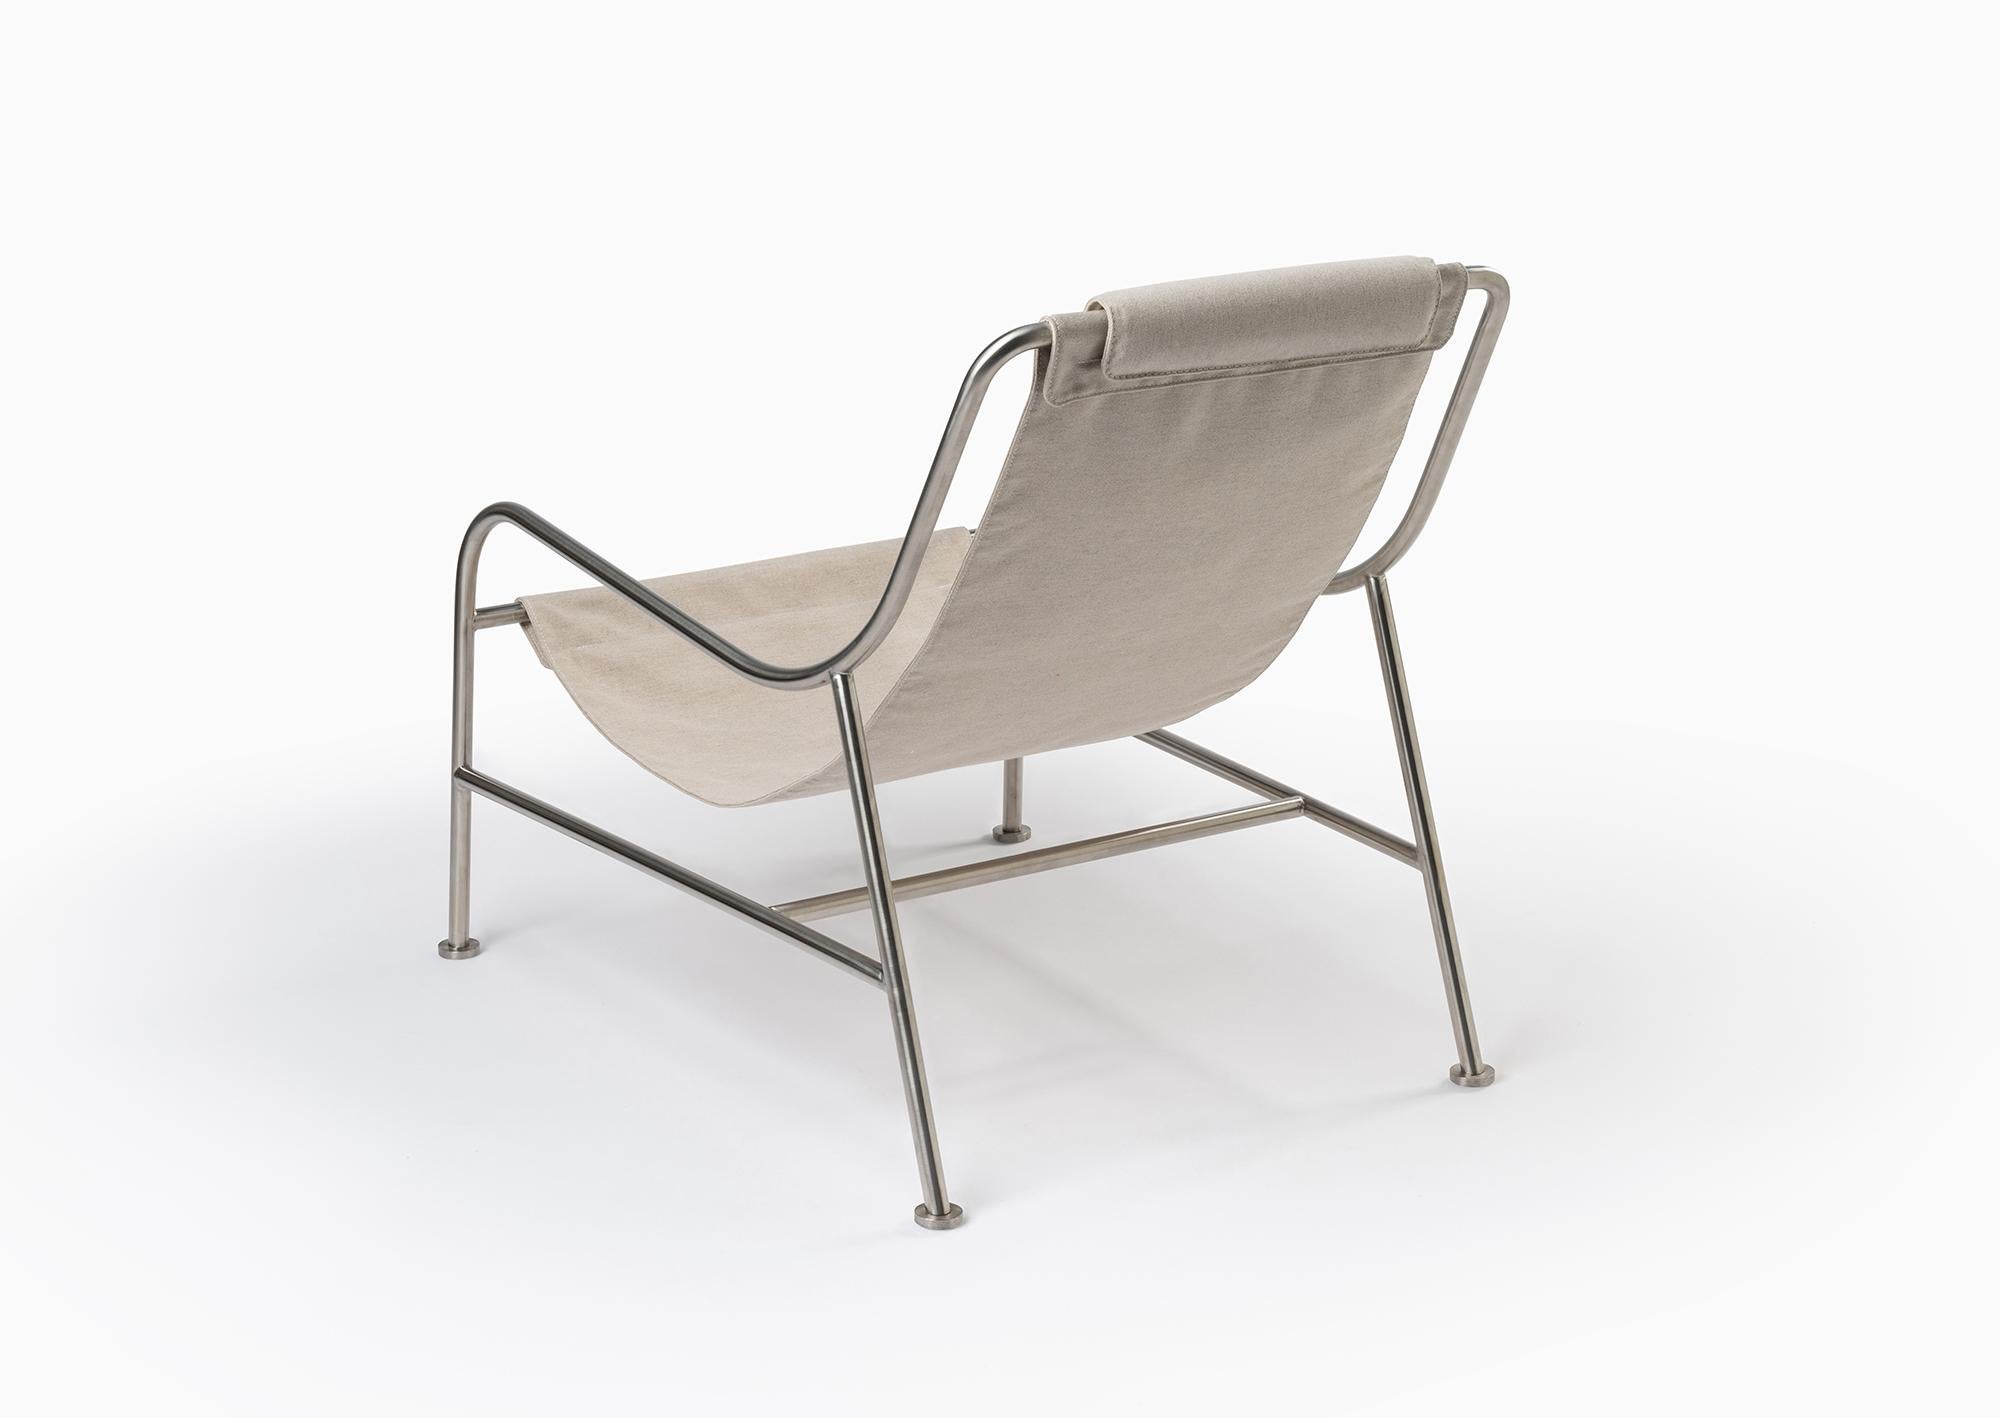 Hand-Crafted Minimalist Outdoor Lounge Chair in 